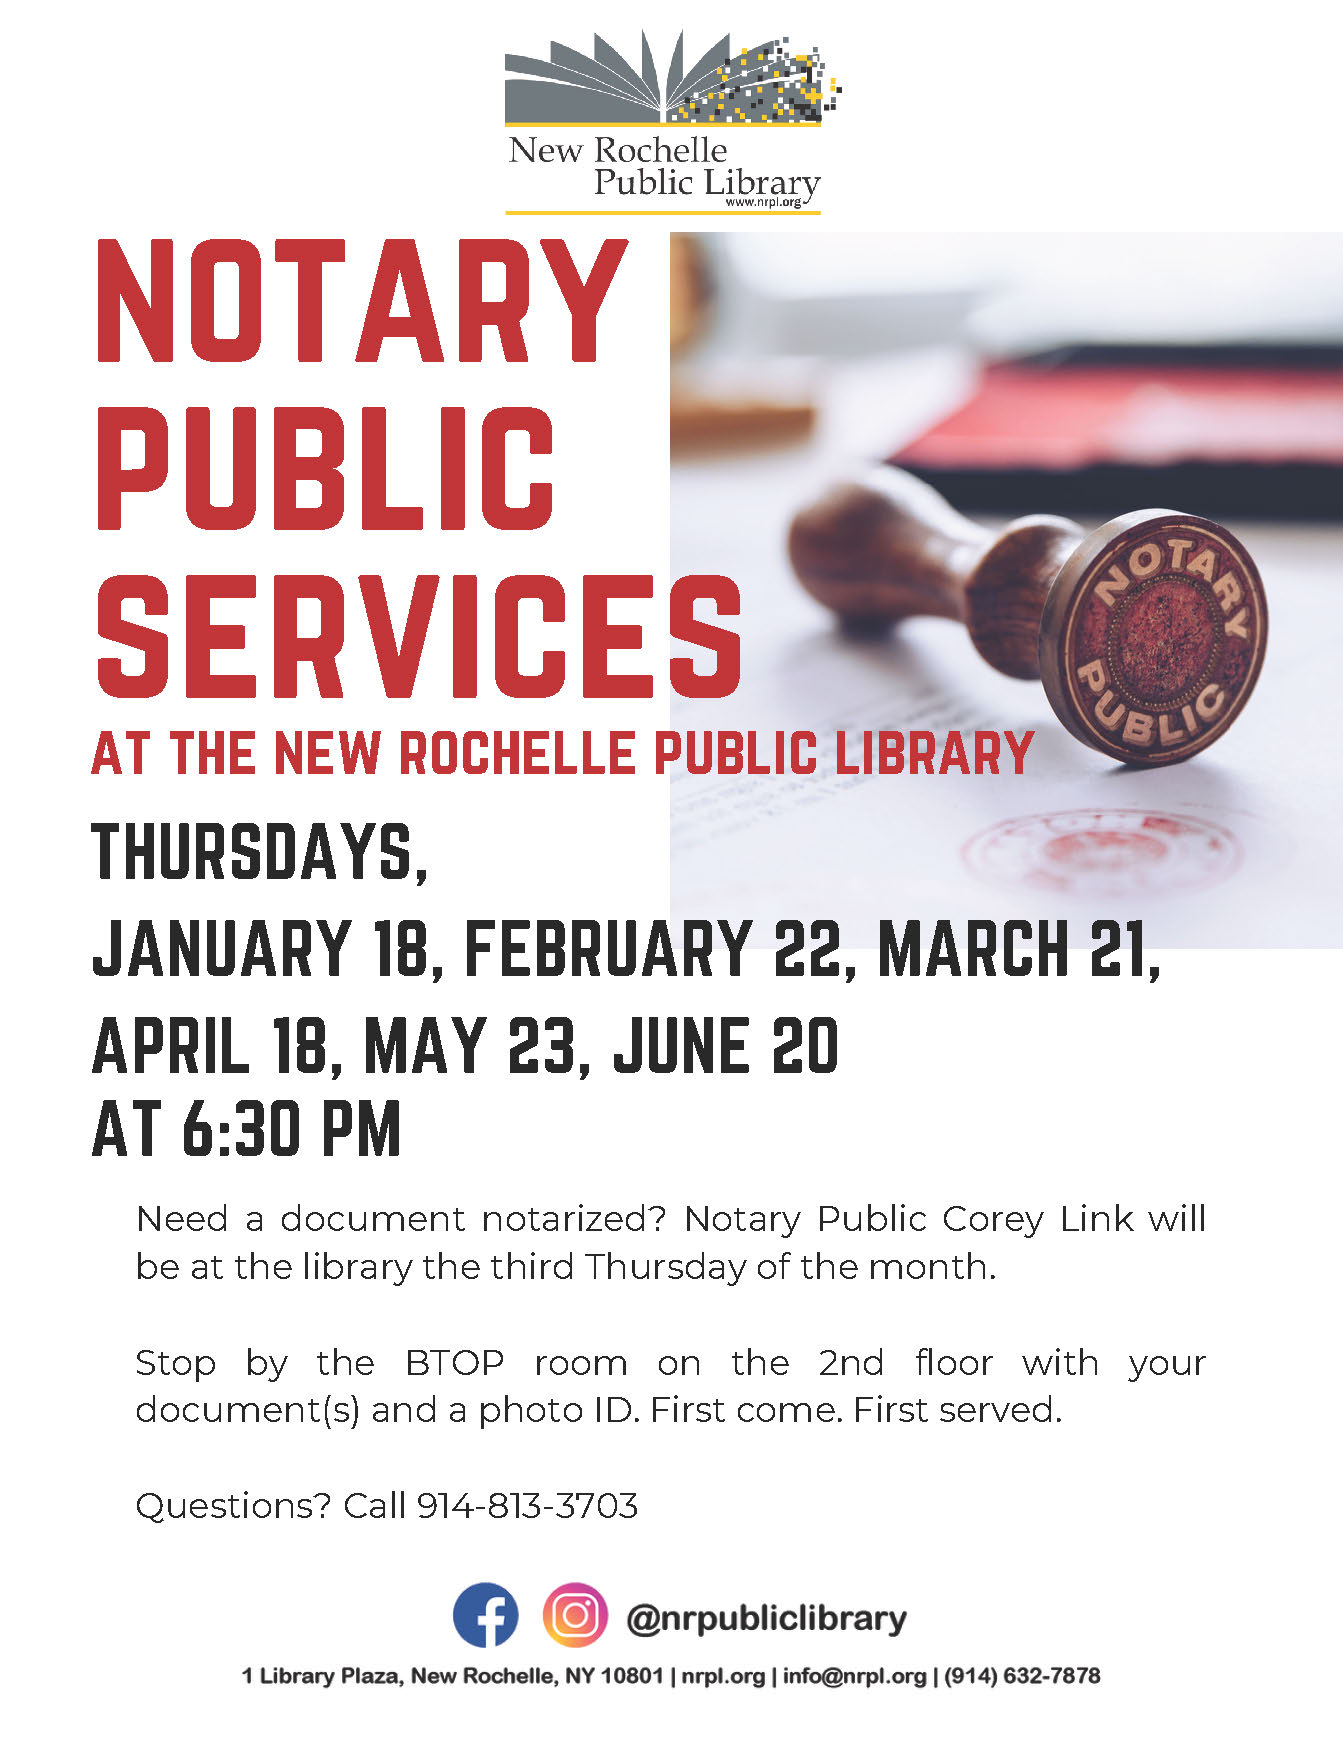 Notary Public Services at NRPL